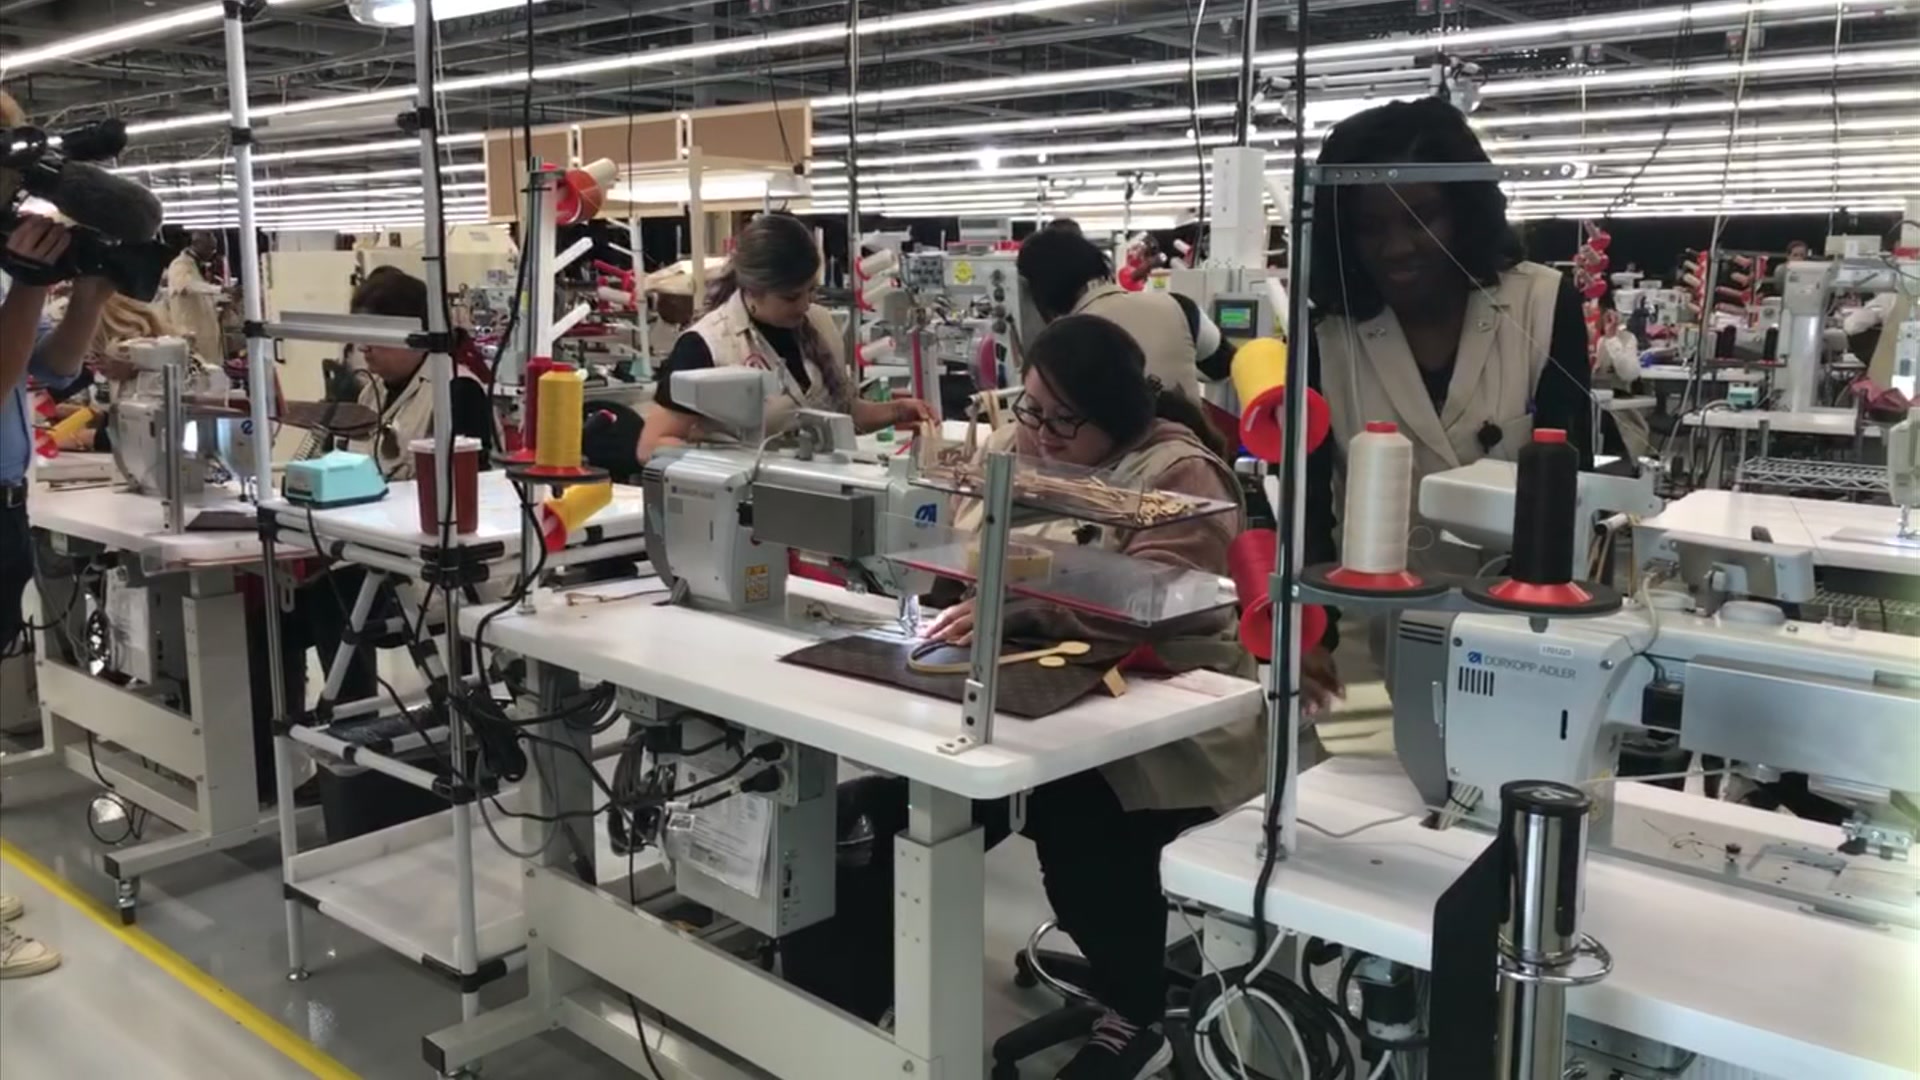 You can visit the Louis Vuitton workshops this fall